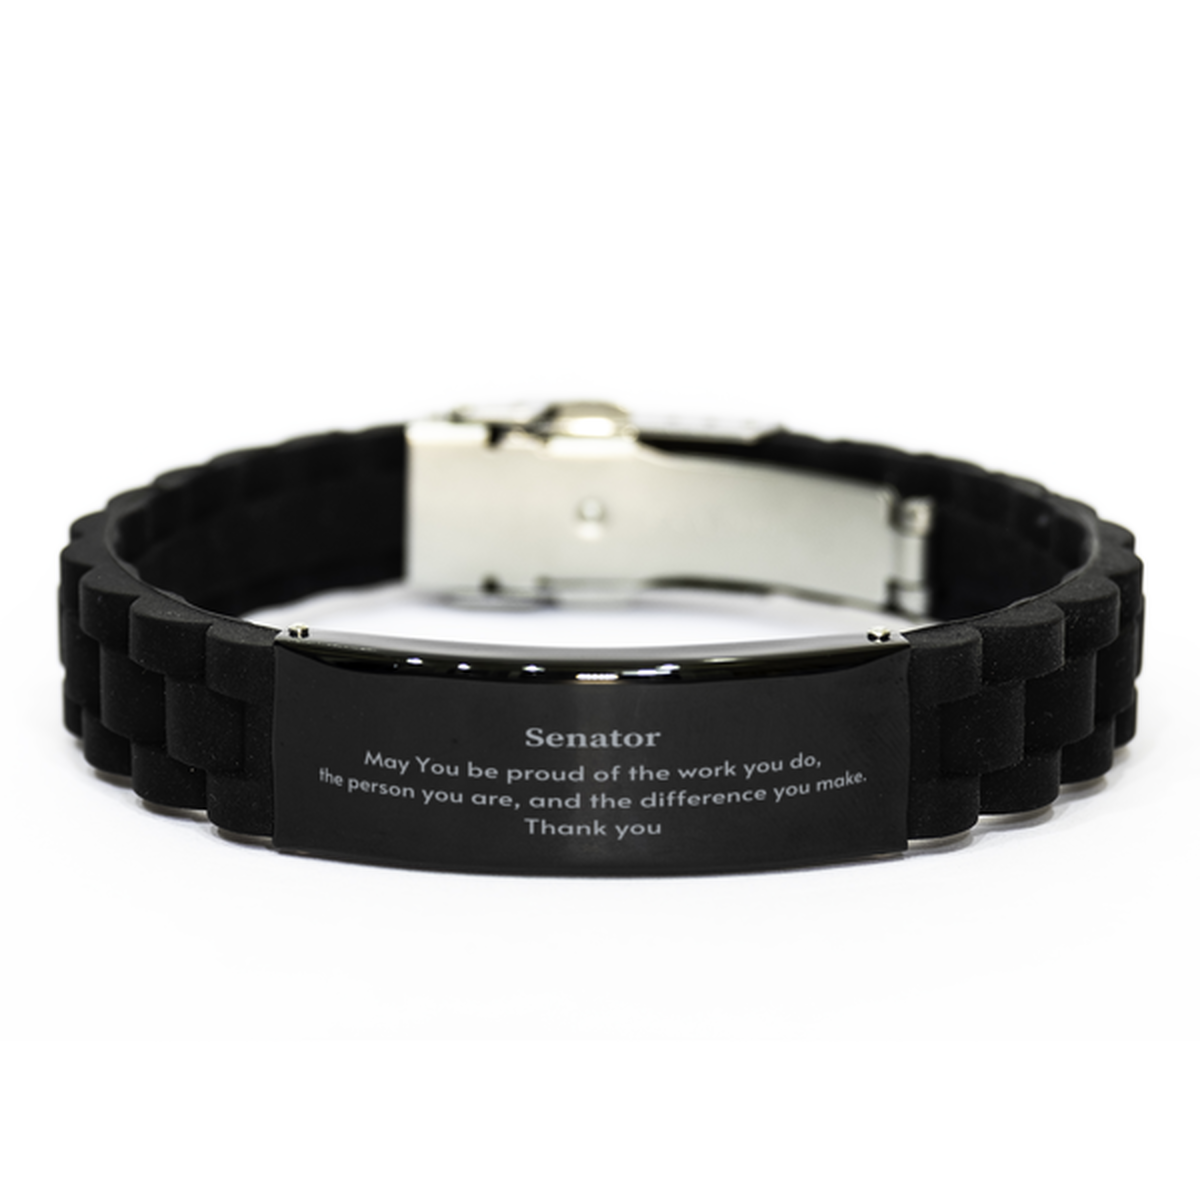 Heartwarming Black Glidelock Clasp Bracelet Retirement Coworkers Gifts for Senator, Senator May You be proud of the work you do, the person you are Gifts for Boss Men Women Friends